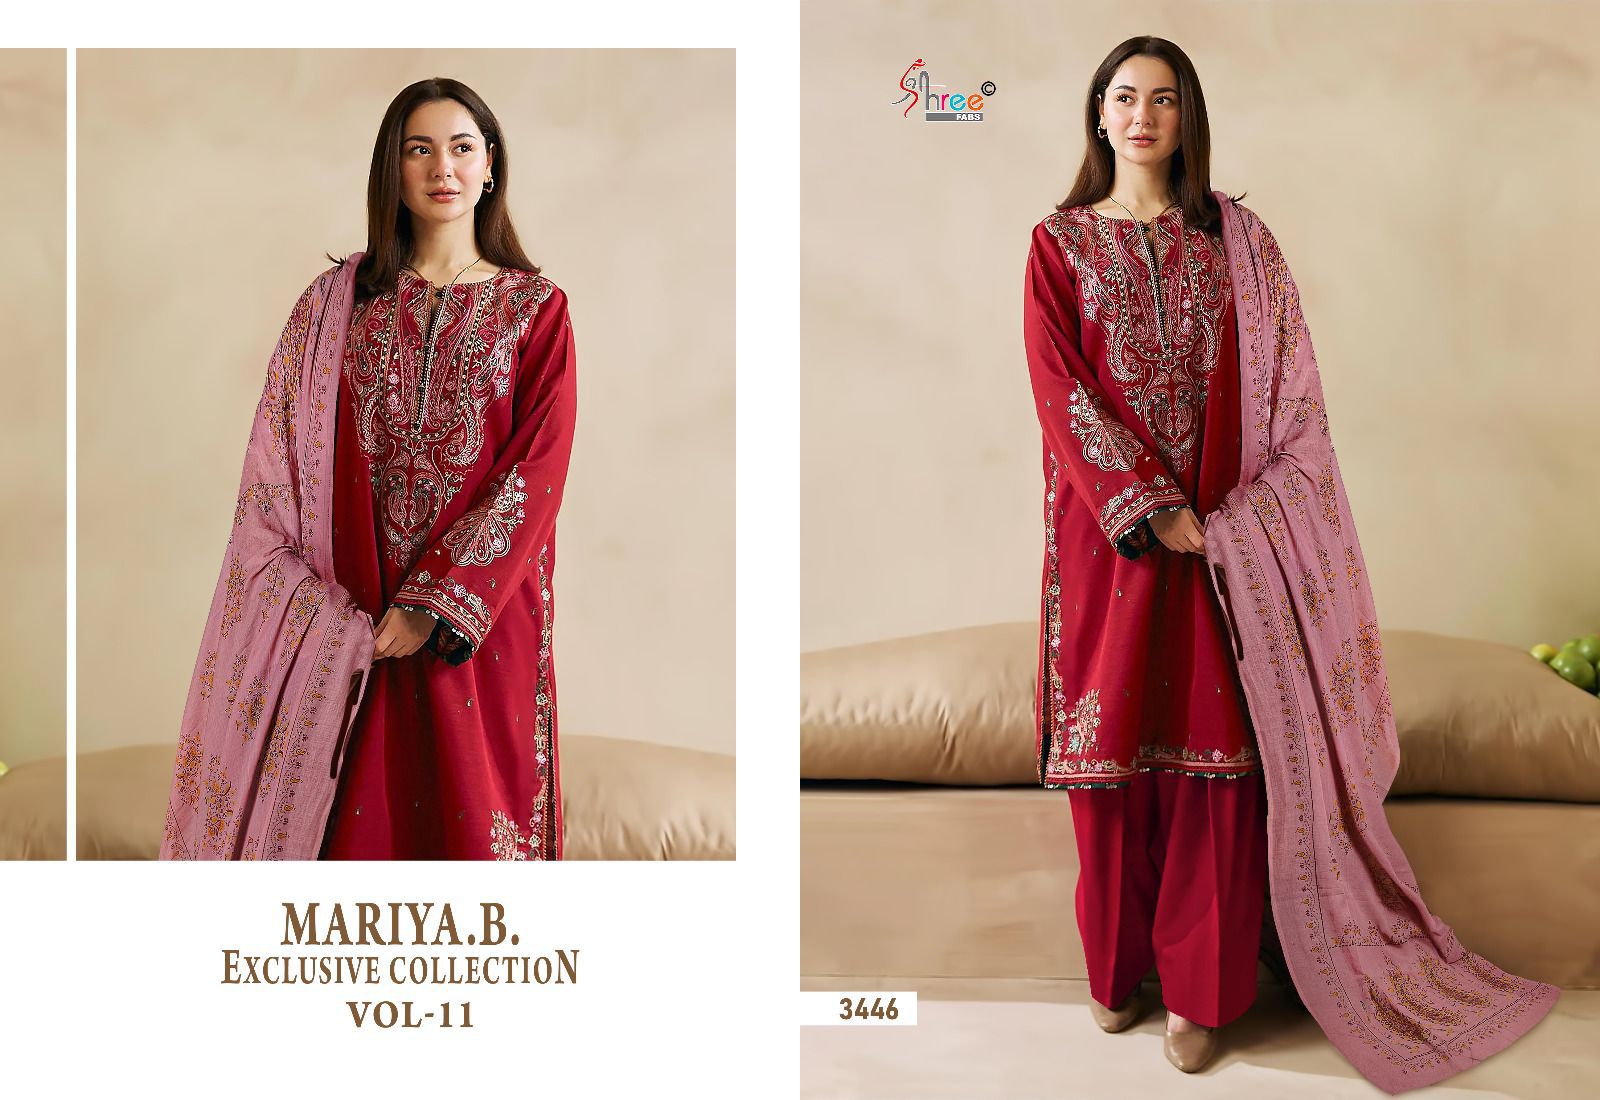 Shree Maria B Exclusive Collection Vol 11 collection 6